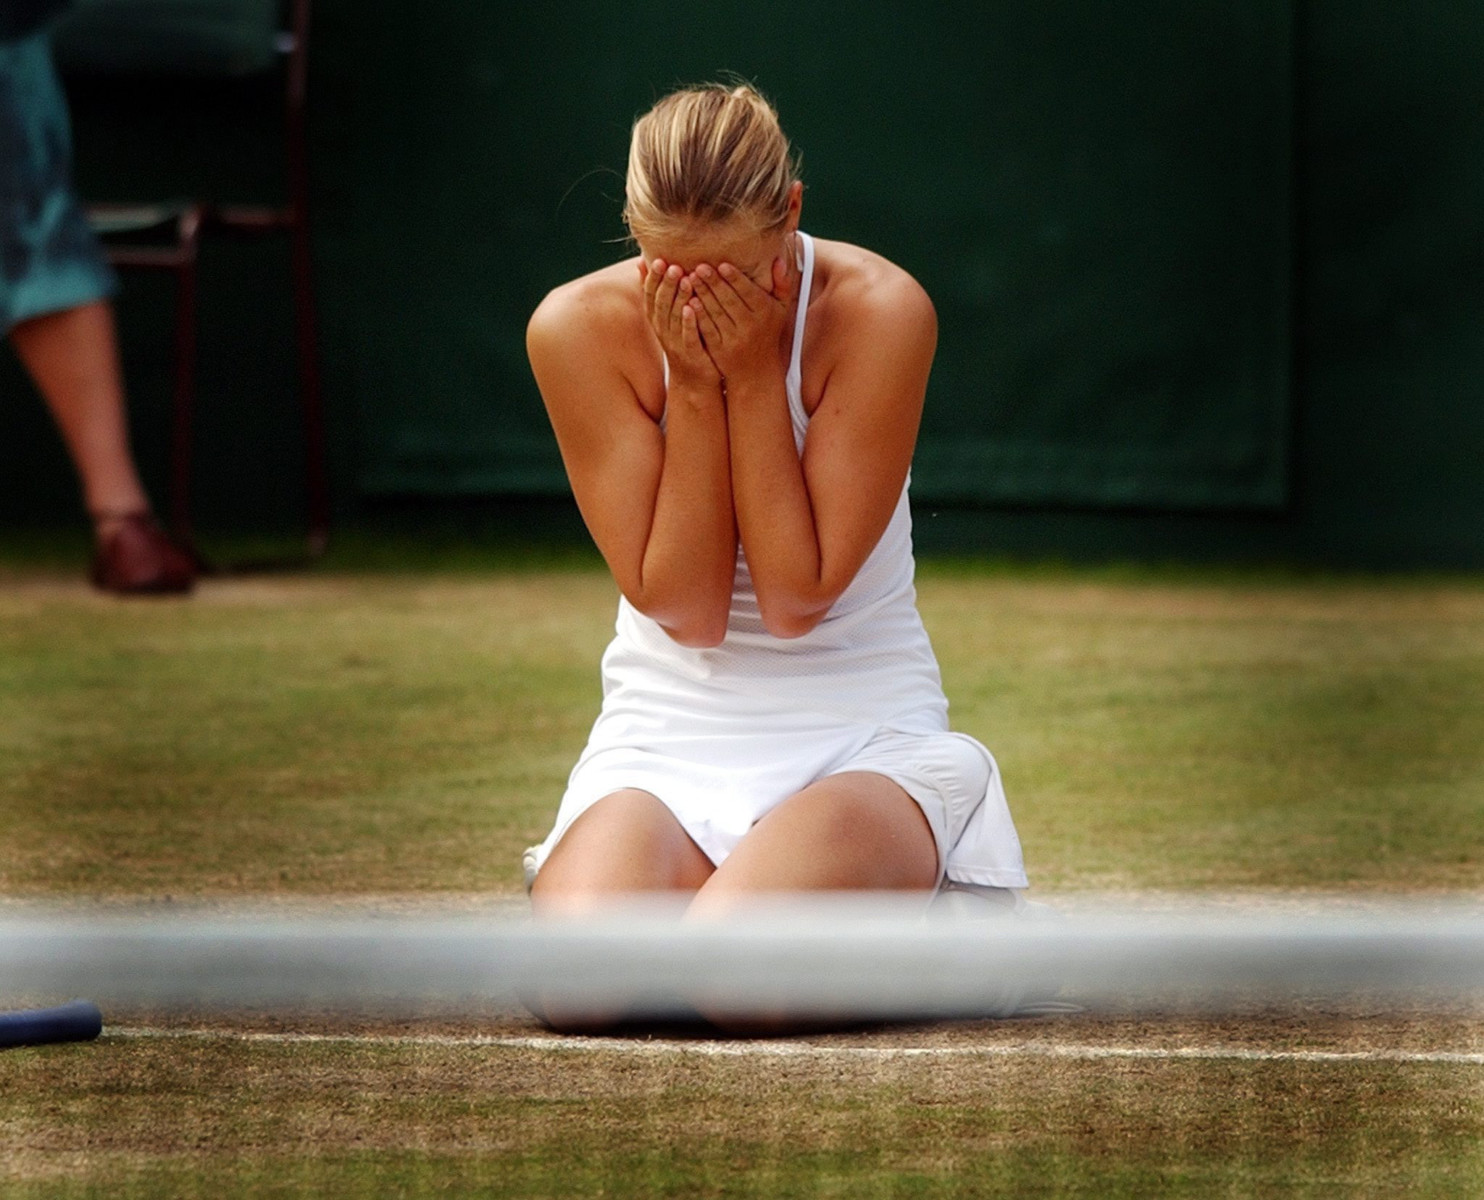 , I wish Maria Sharapova well in retirement.. even if she did call me a virgin at her comeback tournament after drugs ban